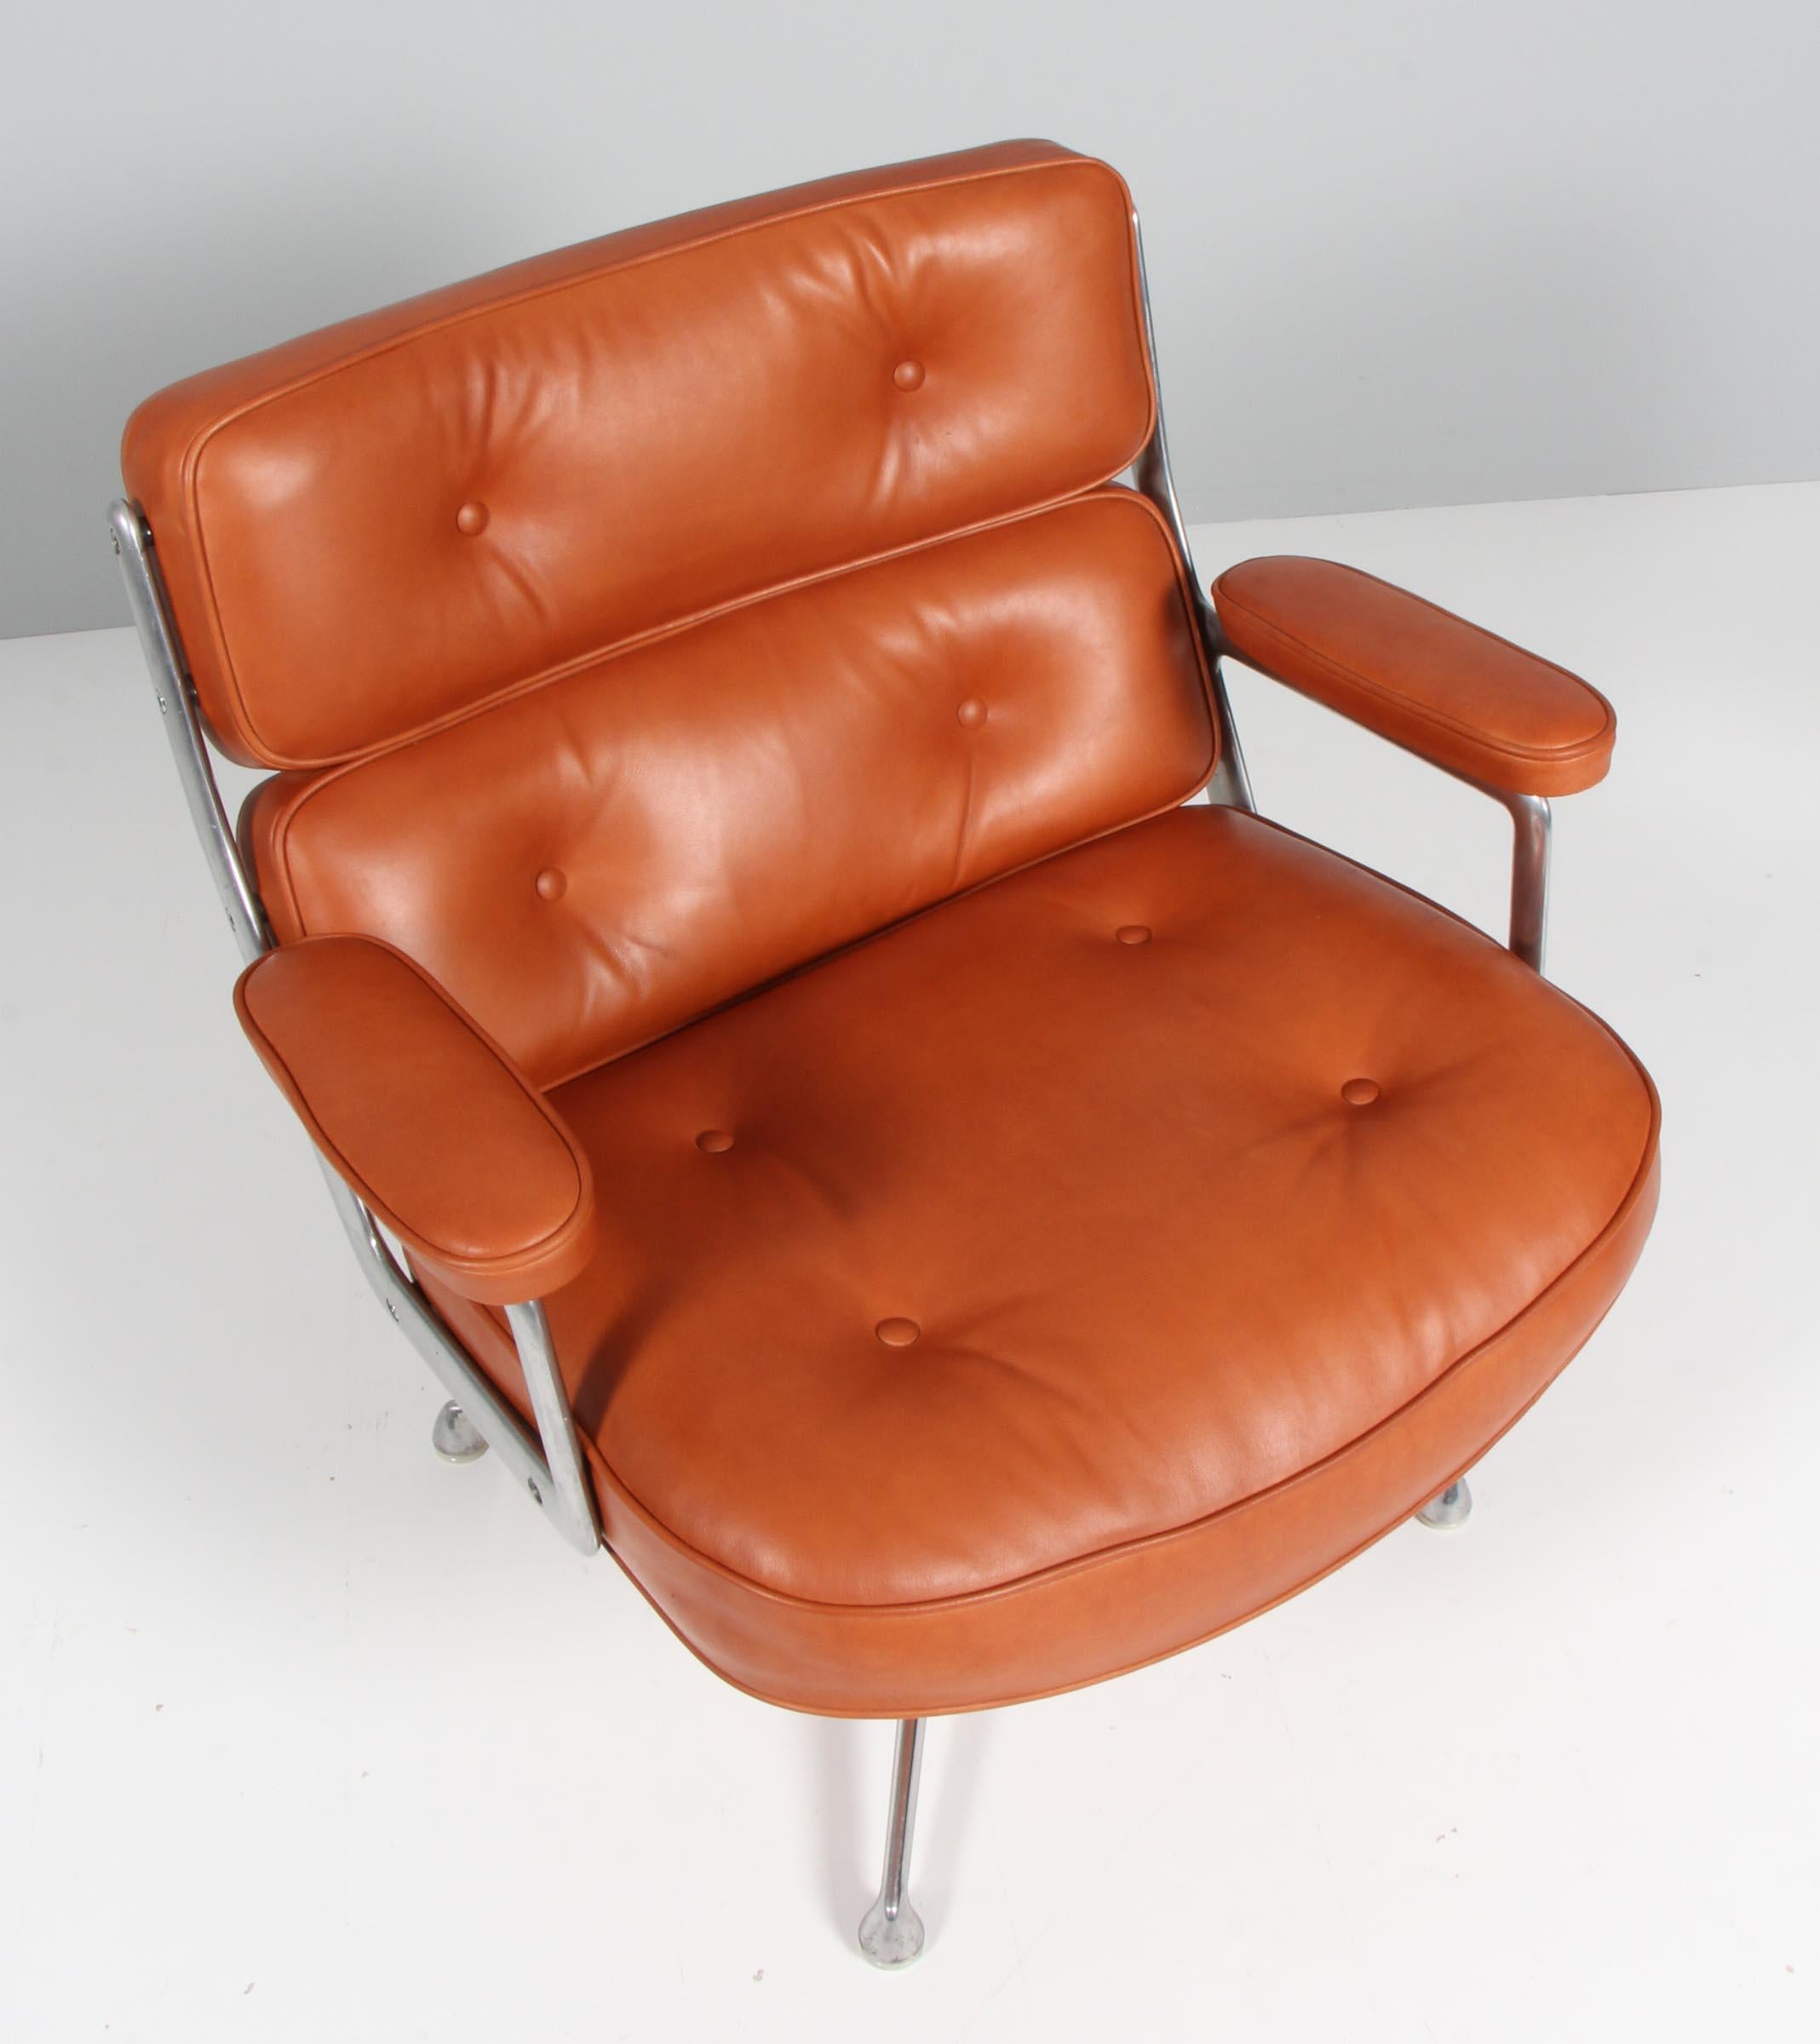 Designed in 1960 for the reception areas of the Time-Life building in New York by Charles & Ray Eames. The Time Life Lobby Chair combines the characteristics of some of the other iconic designs they developed around the same period. The wide seat,